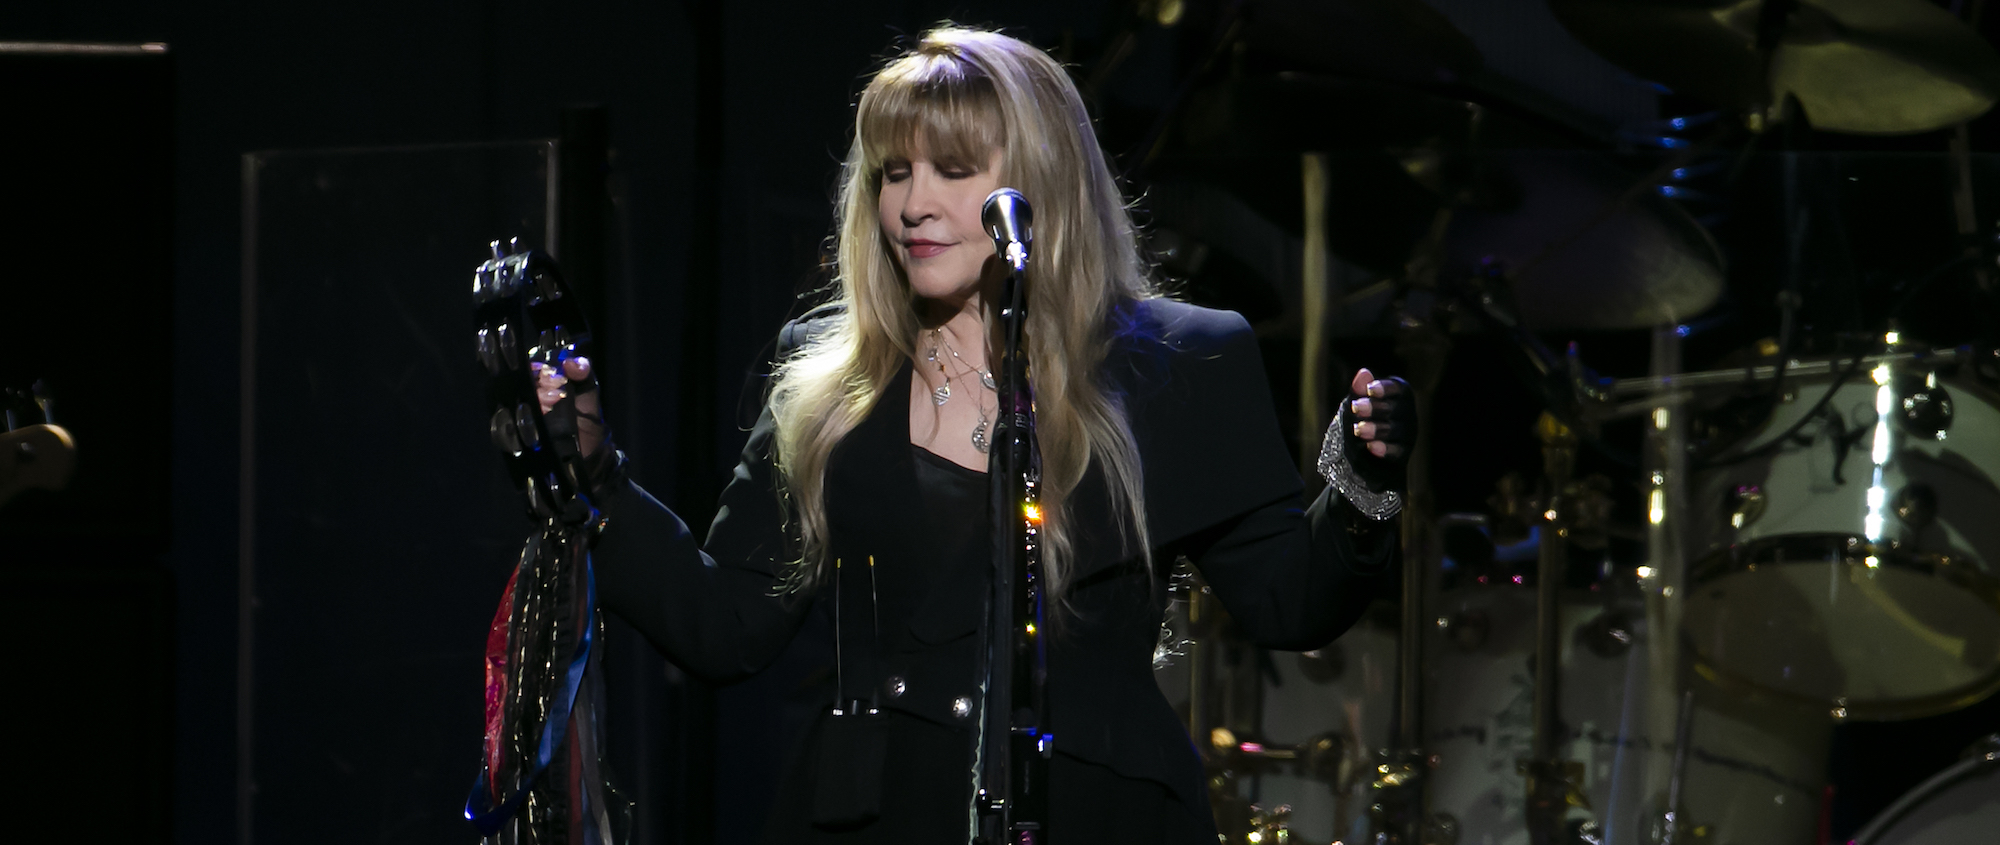 Stevie Nicks Reflects on One-Year Anniversary of Uvalde Shooting: “I Will Never Be Able to Let This Go”